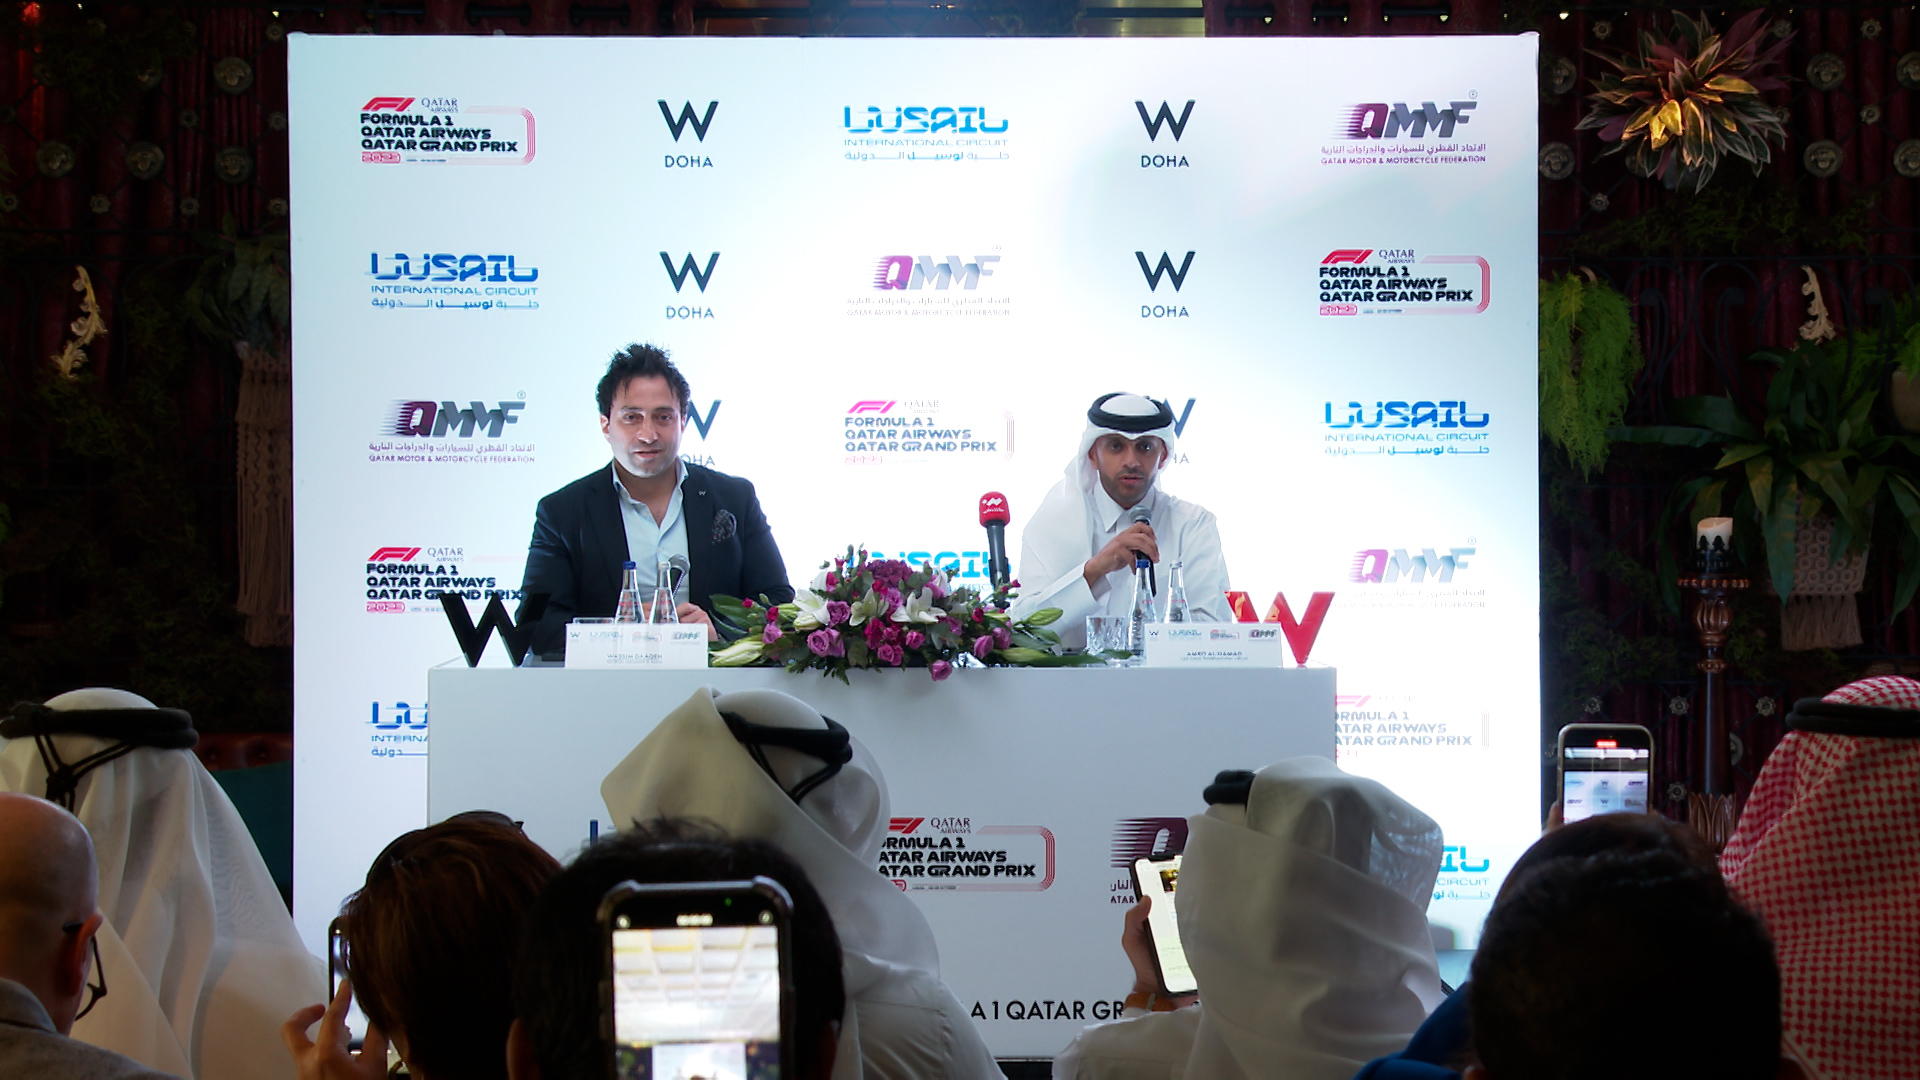 W Doha Seals Thrilling Collaboration with Lusail International Circuit as the Official Hotel Partner & Caterer for the FORMULA 1 QATAR AIRWAYS QATAR GRAND PRIX 2023